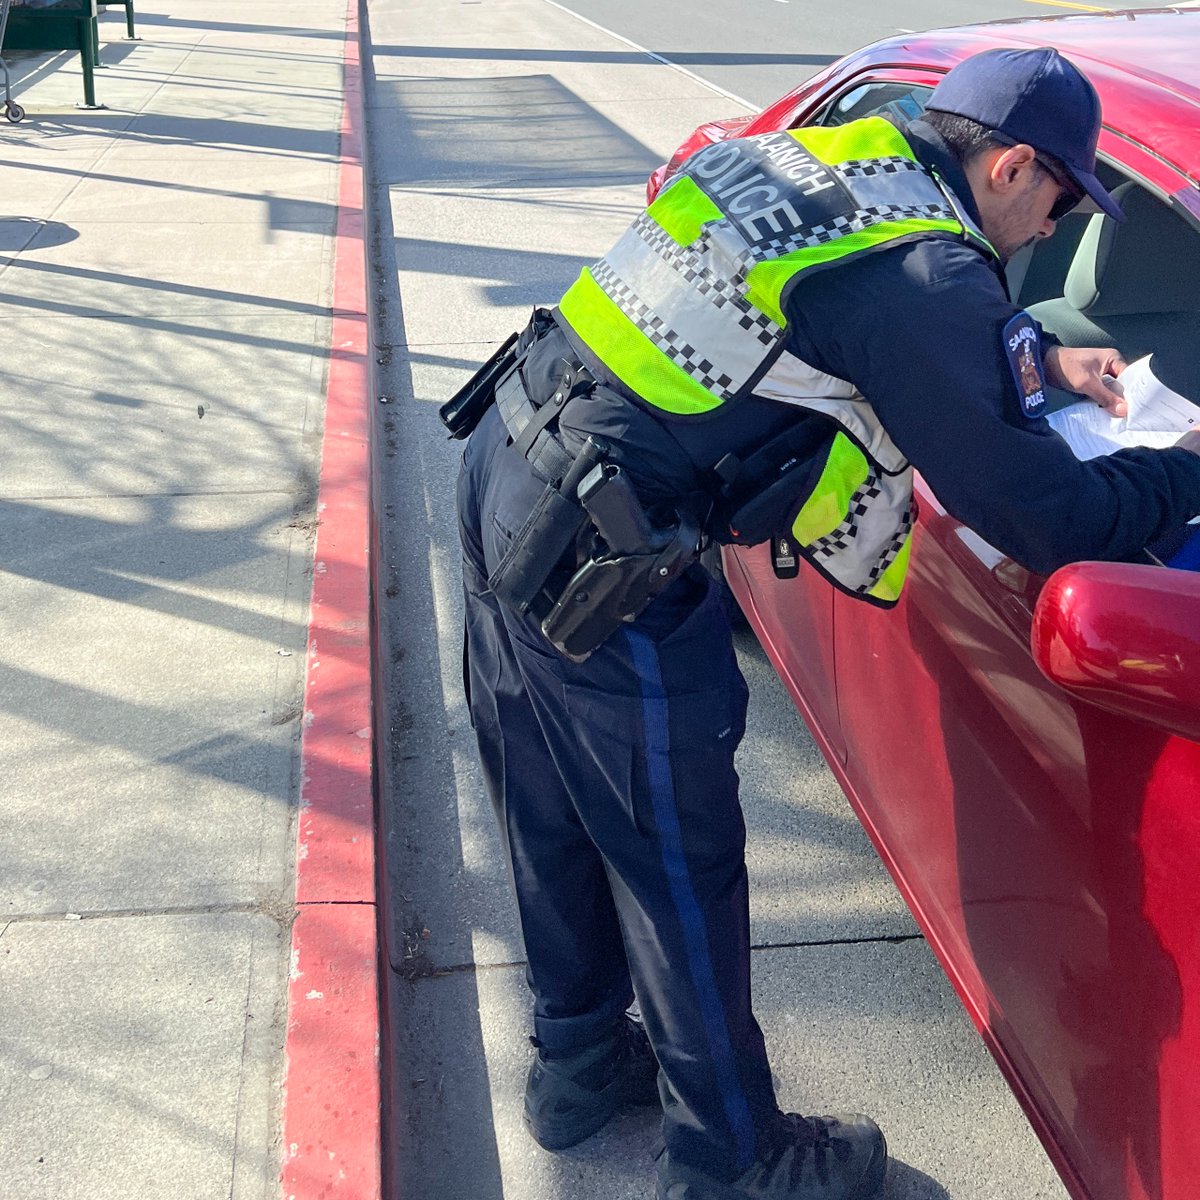 March signifies Distracted Driving month and our continued efforts to promote safer roads in Saanich for all users. DYK the law applies even while you're stopped in traffic? #LeaveYourPhoneAlone #EyesFwdBC